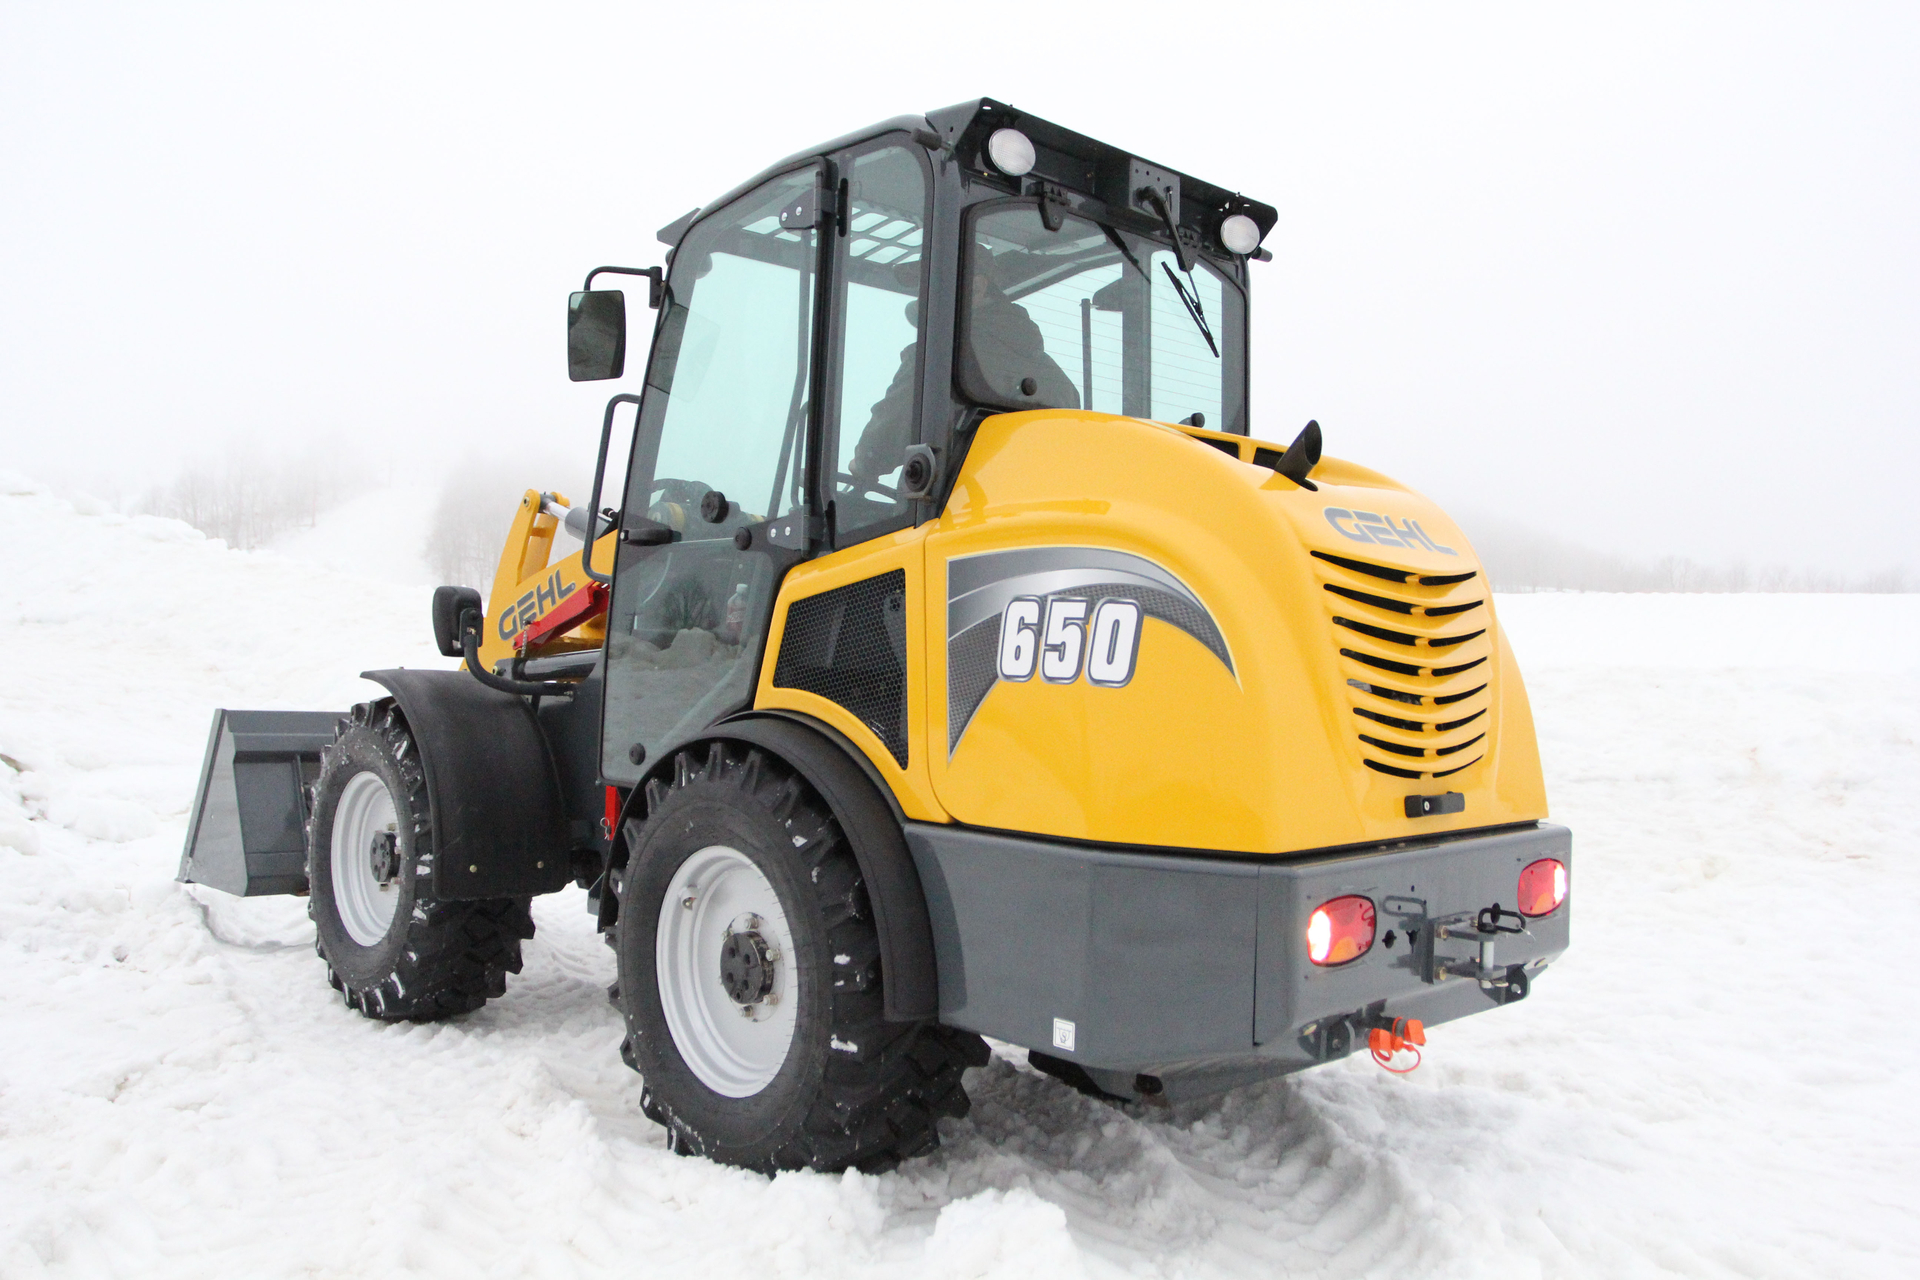 Gehl 650 in the snow